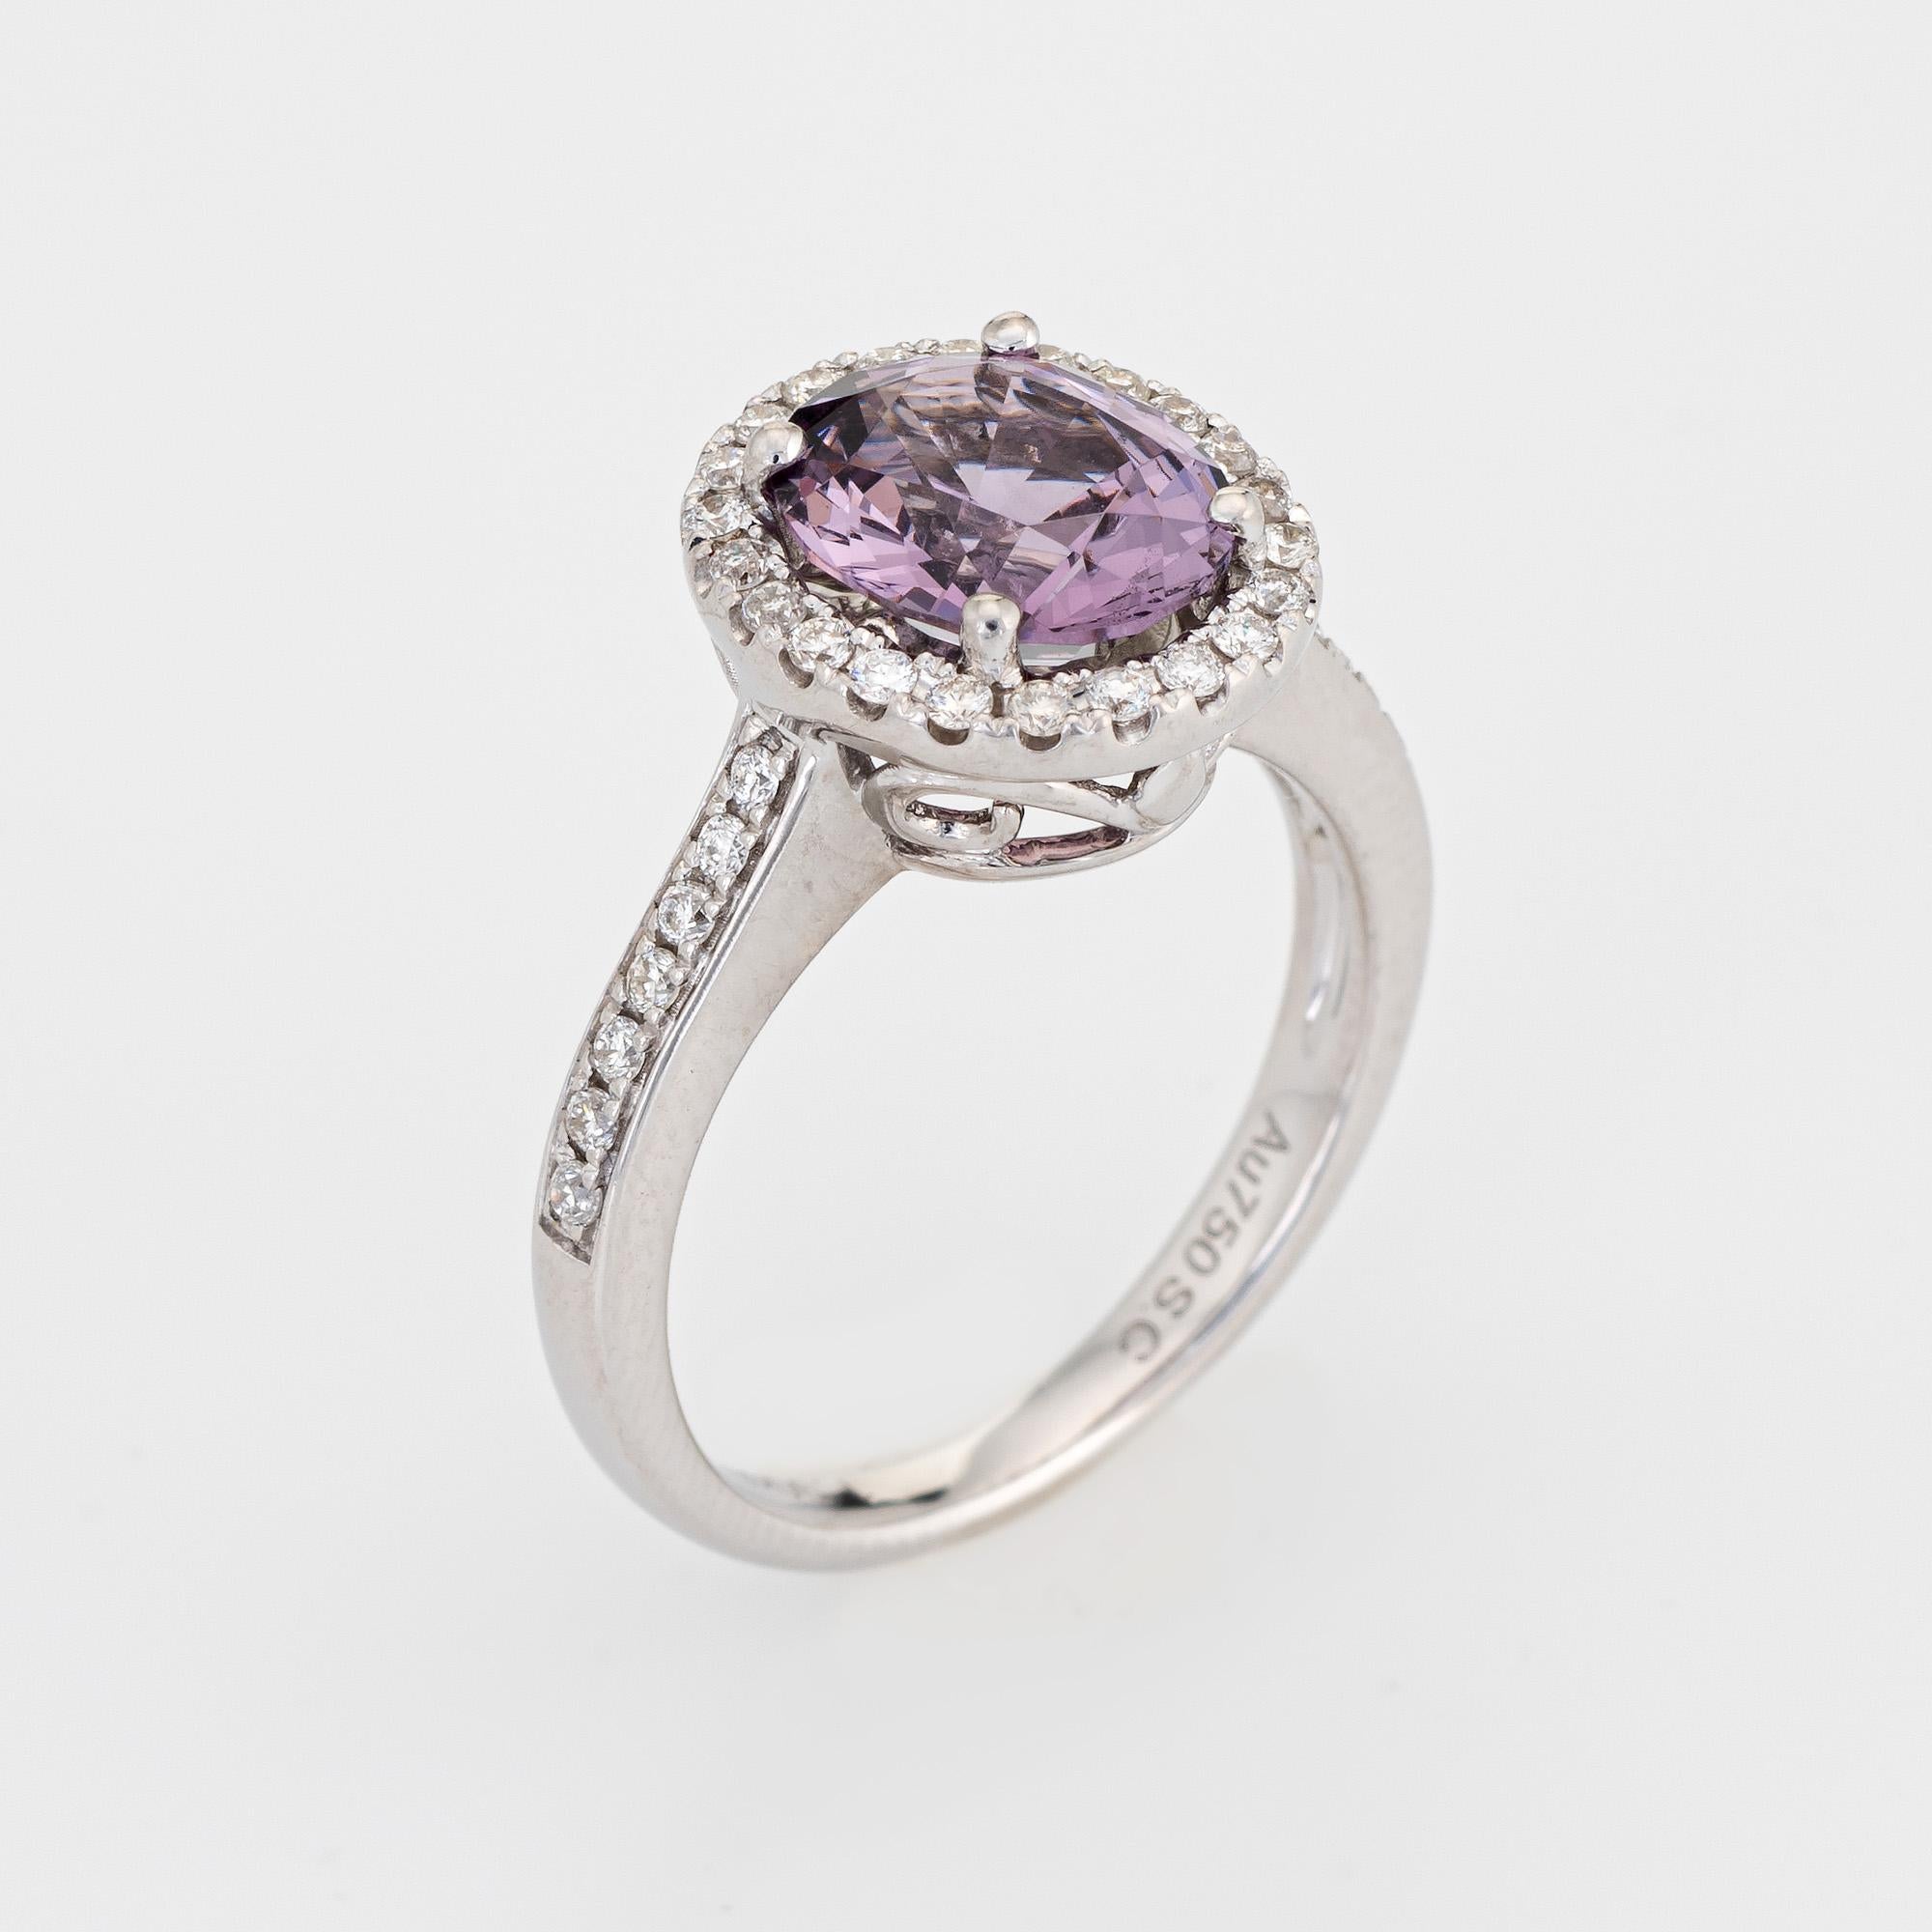 Stylish purple spinel & diamond ring (circa 2000s) crafted in 14 karat white gold. 

Oval faceted purple spinel measures 8.5mm x 7mm (1.90 carats), accented with an estimated 0.28 carats of diamonds (estimated at H-I color and VS2-SI1 clarity). The